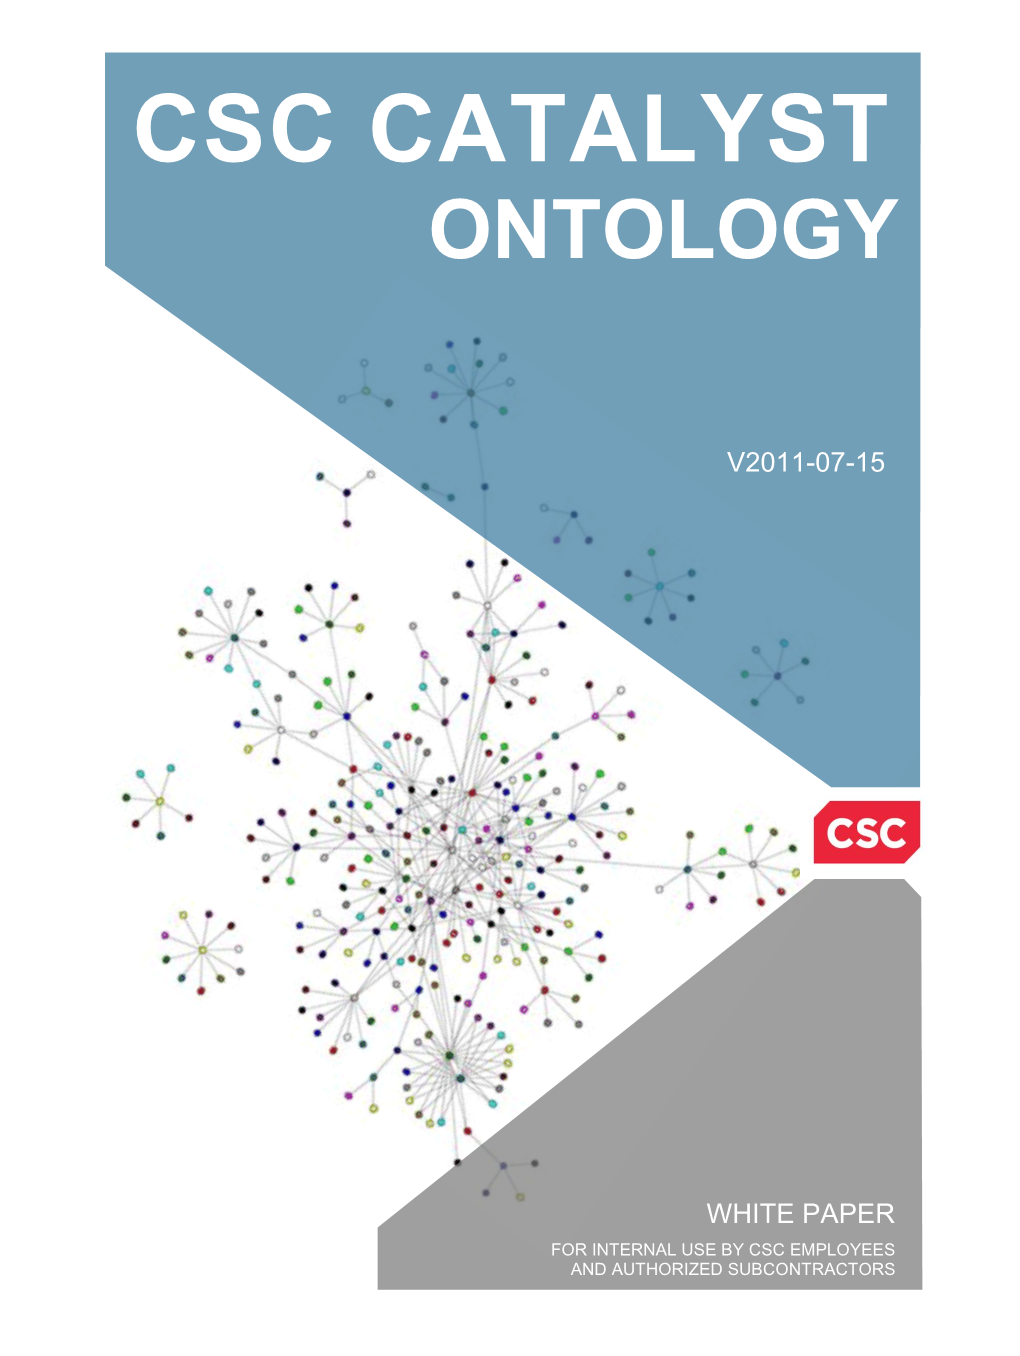 Ontology White Paper, V2011-07-15 ©2011 by Computer Sciences Corporation